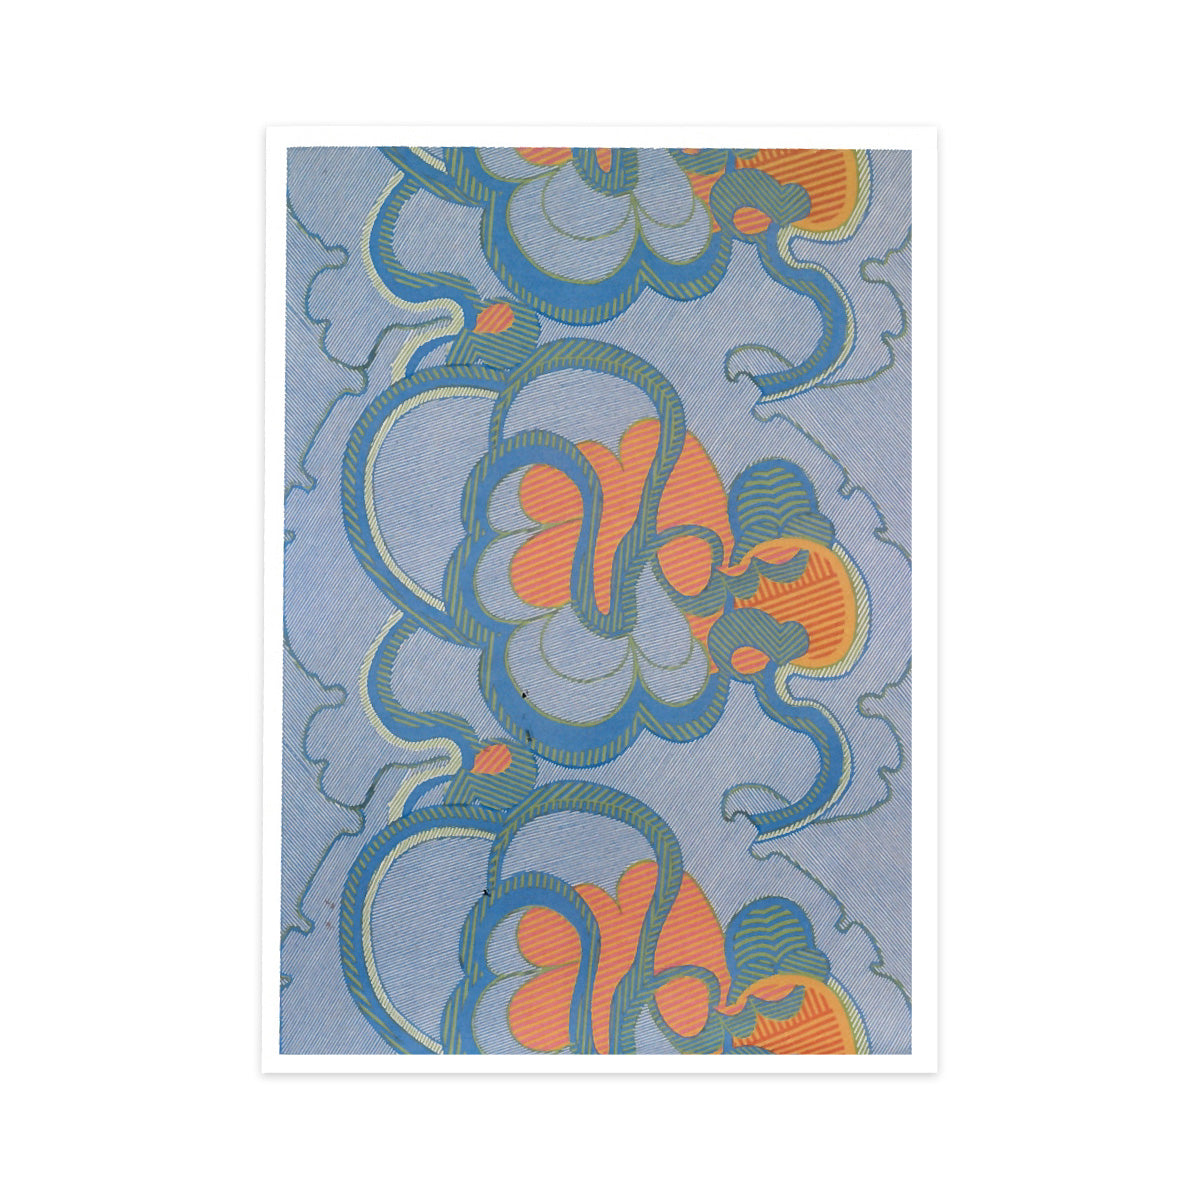 Greetings card pack featuring a reproduction of a textile design by Shirley Craven